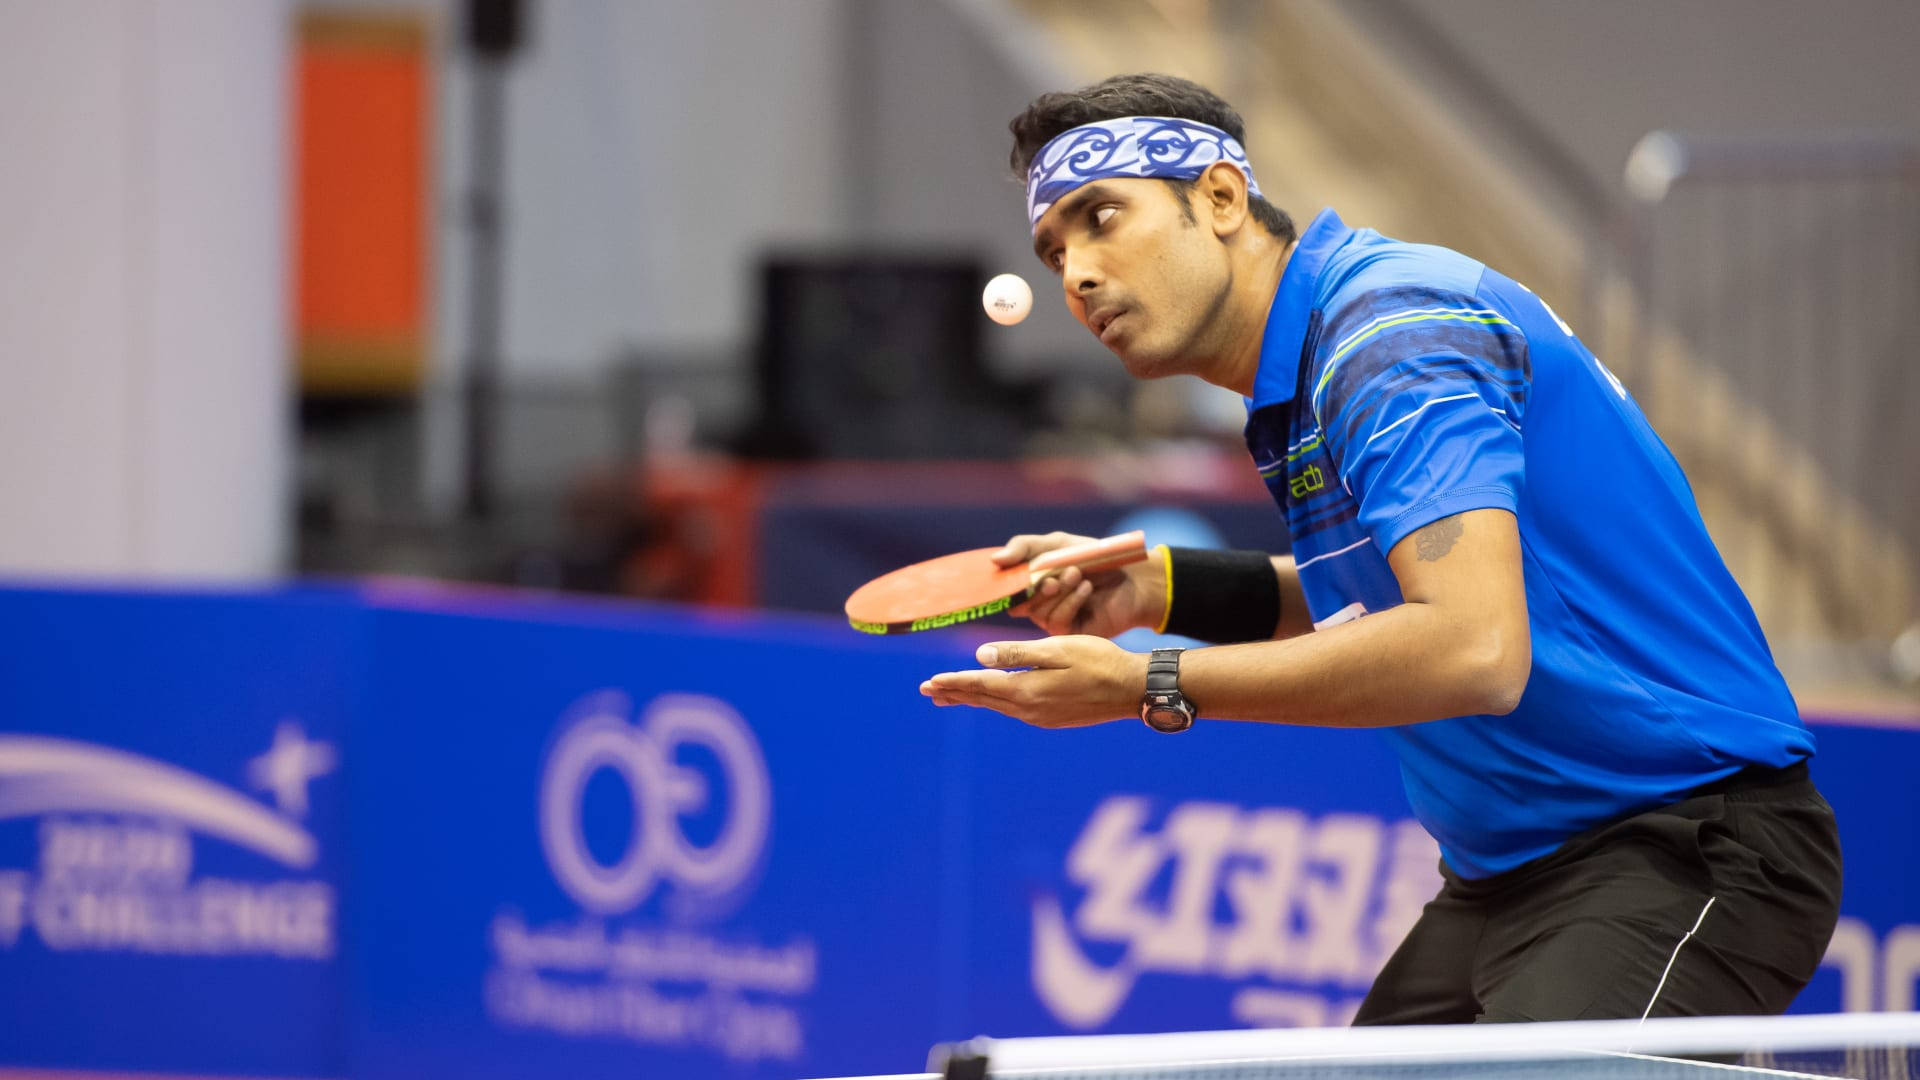 Table Tennis Professional Player Background